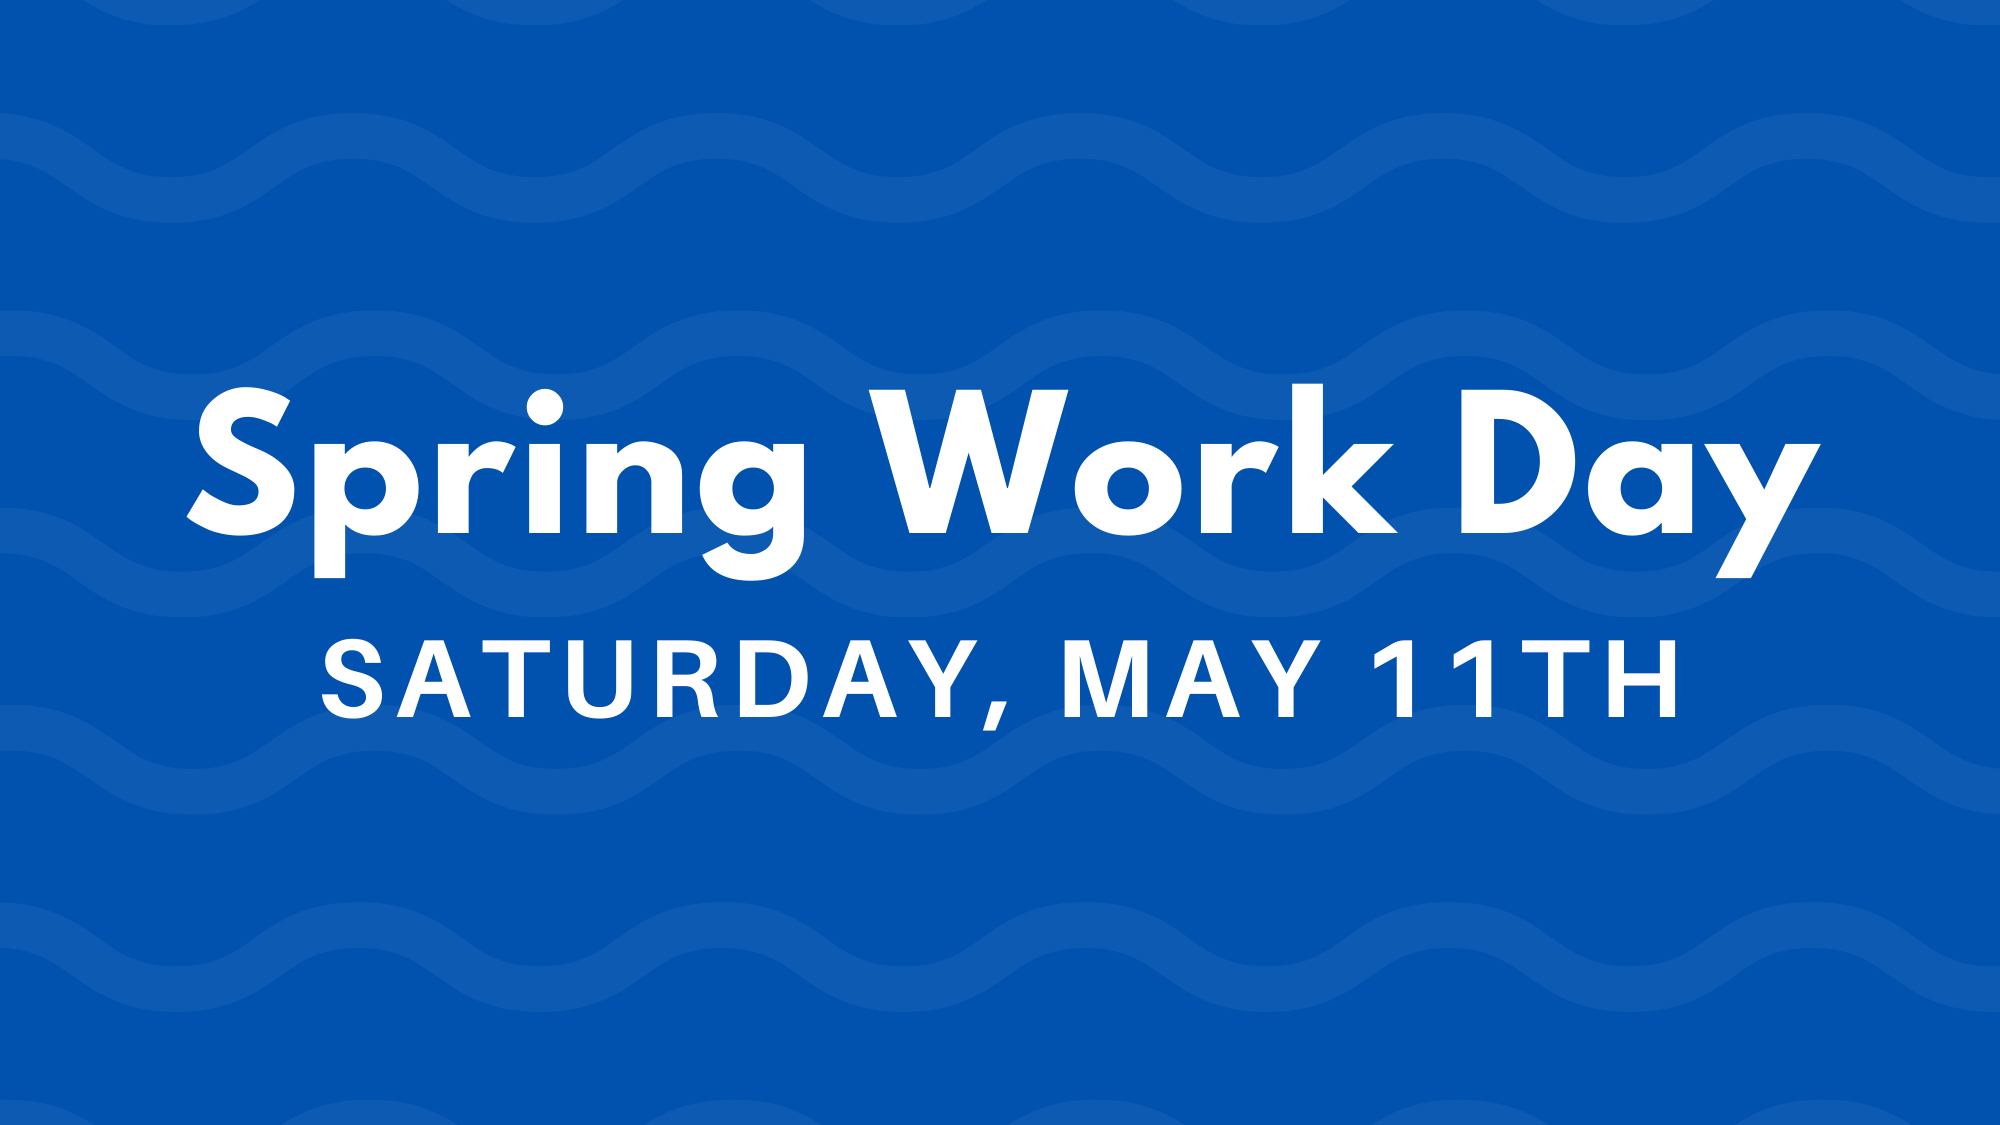 Spring Work Day Promotional Banner